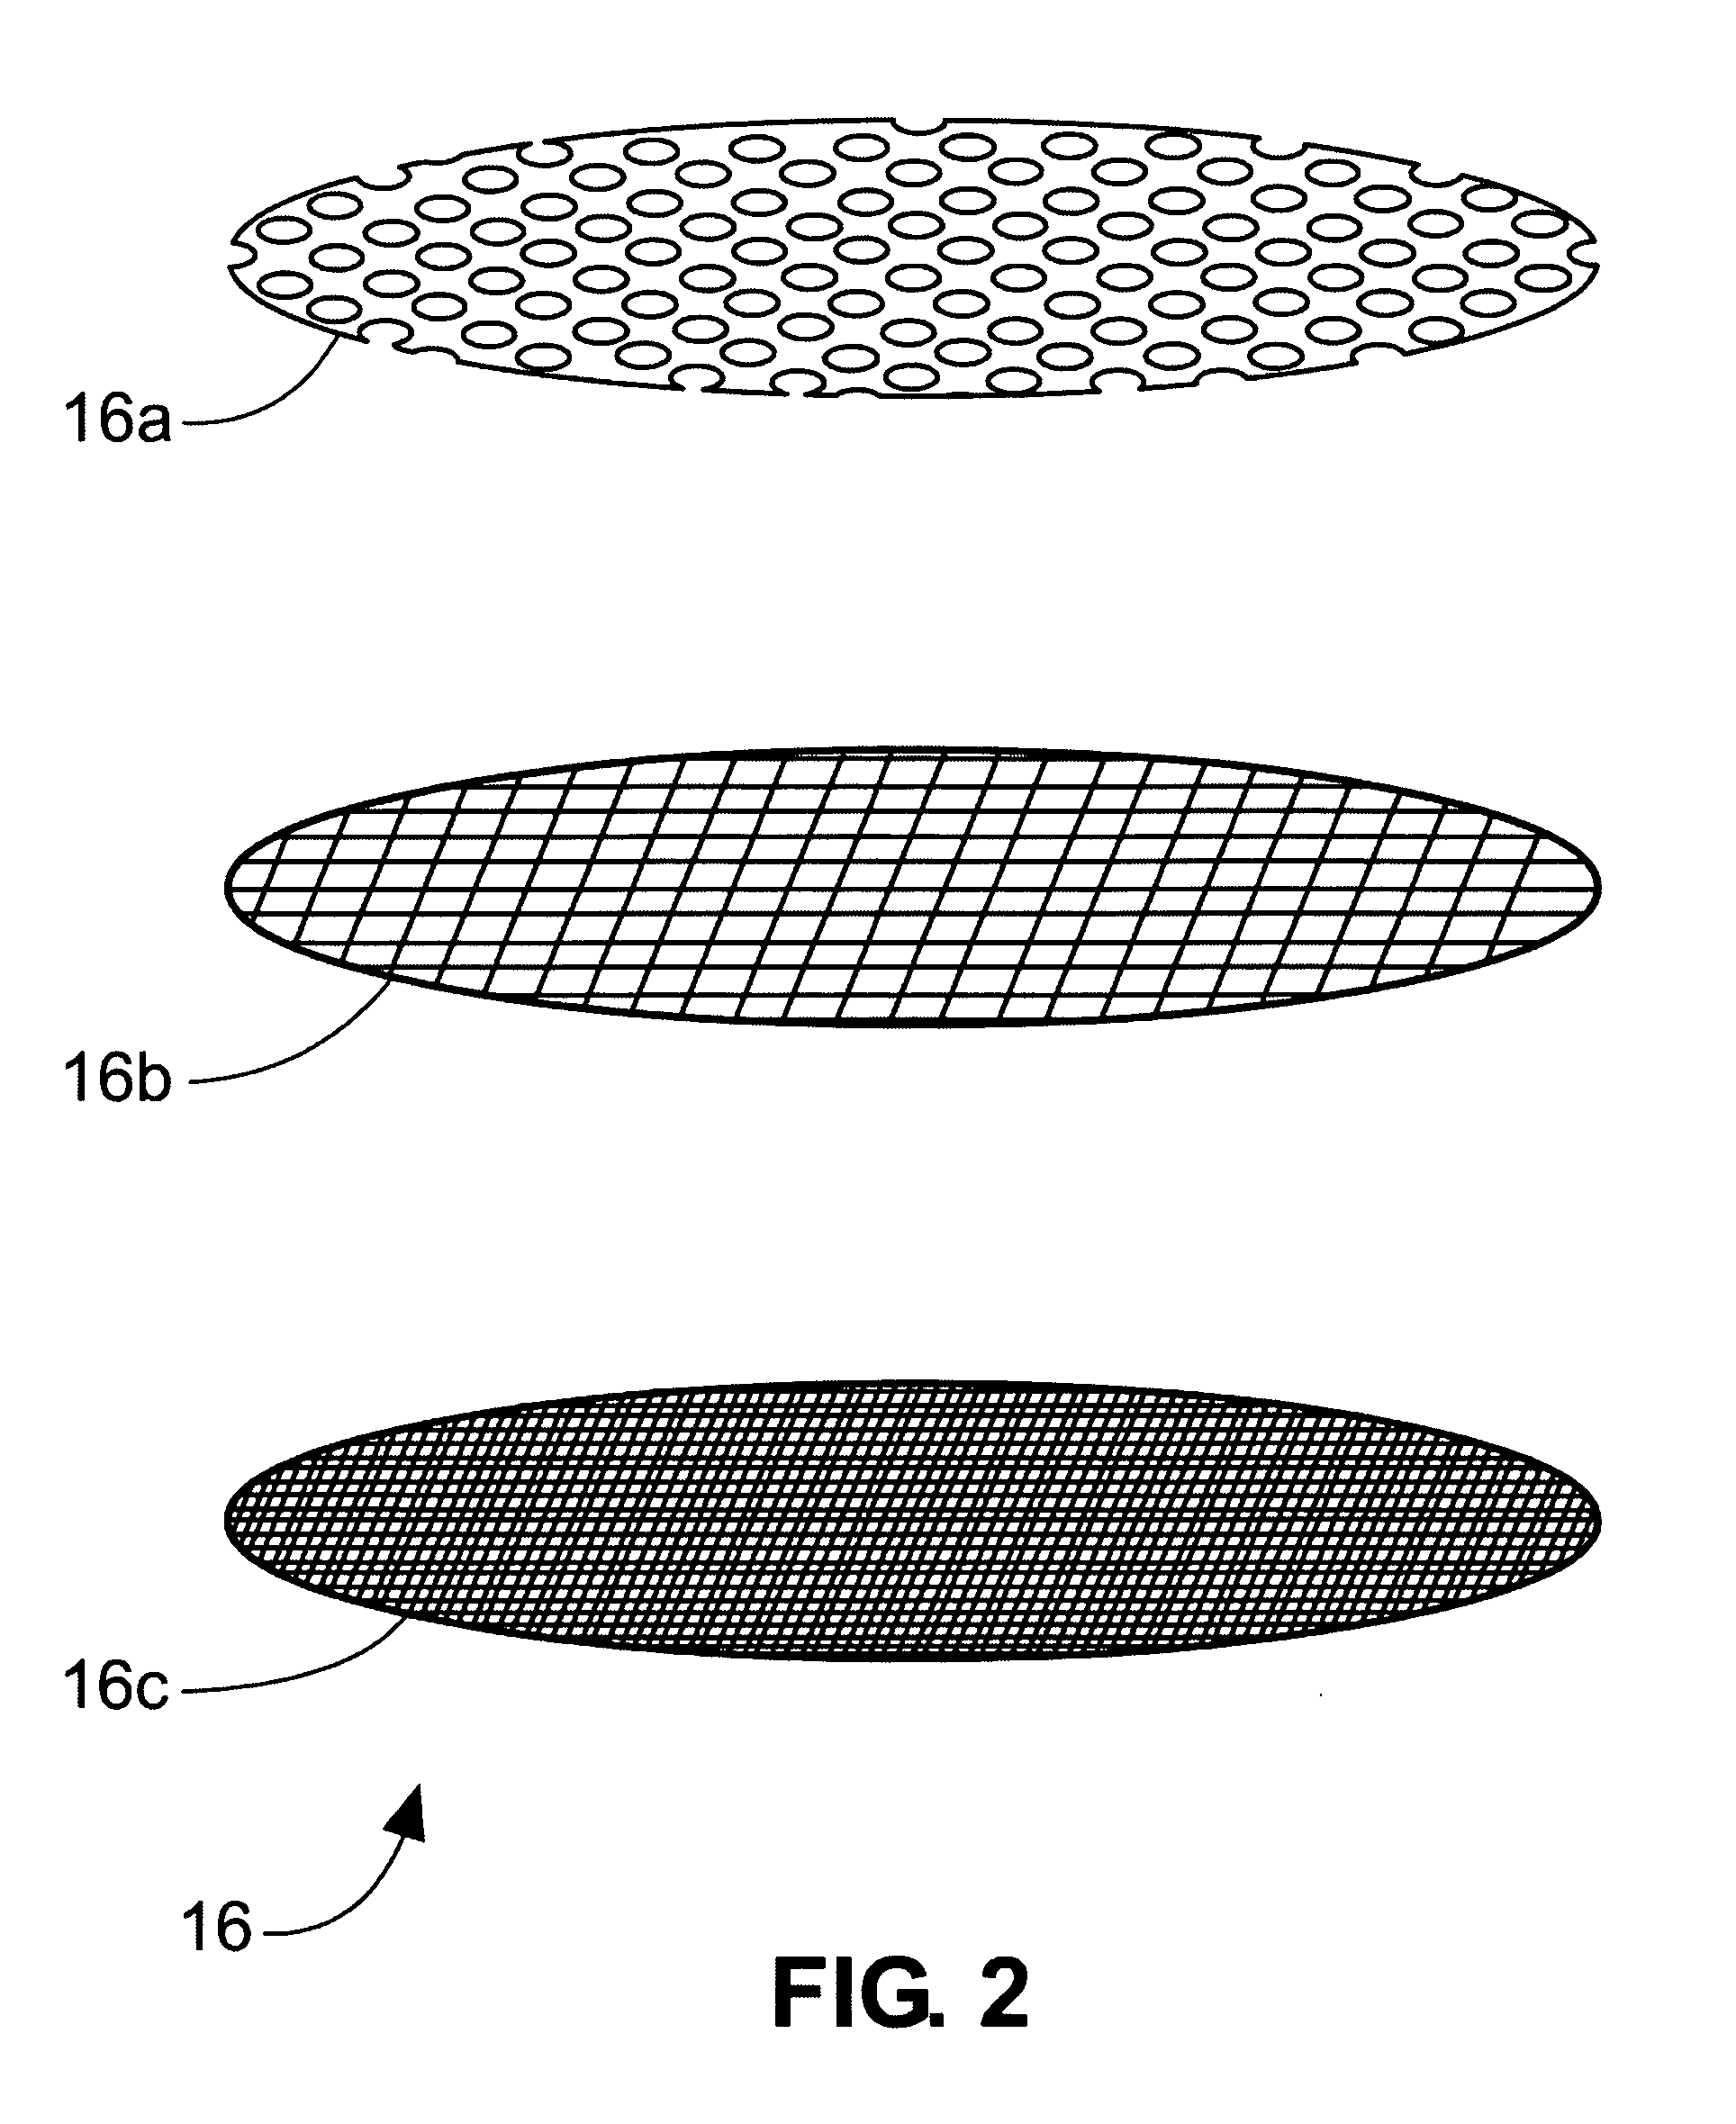 Liquid filtration apparatus and method embodying super-buoyant filtration particles